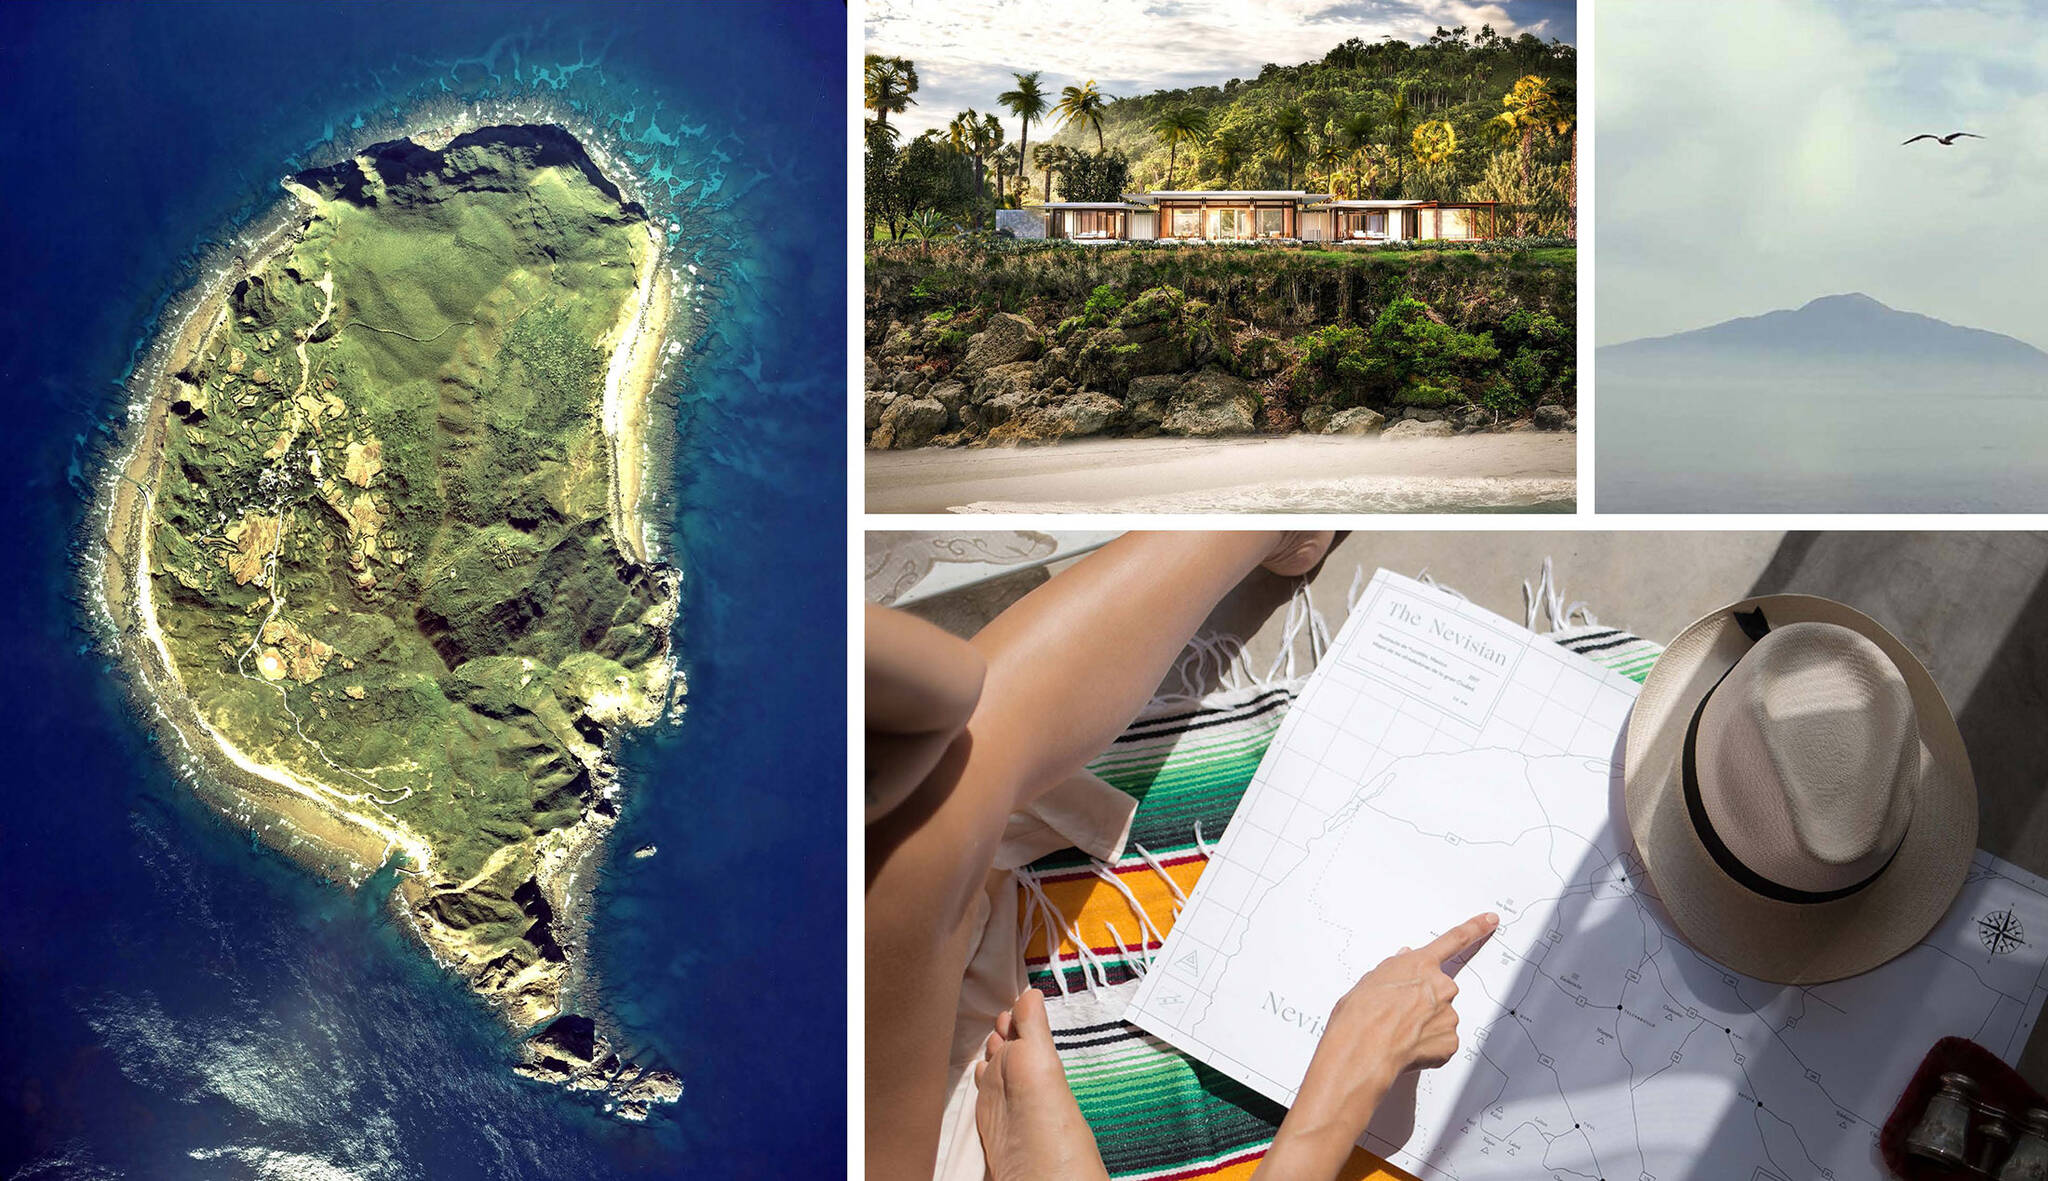 Moodboard of the look and feel of the Nevisian Luxury Resort project designed by the architecture studio Danny Forster & Architecture. A luxury resort with restaurants, villas, spas, a conference center, and the world’s first 5-star modular hotel located in Nevis island in the Lesser Antilles